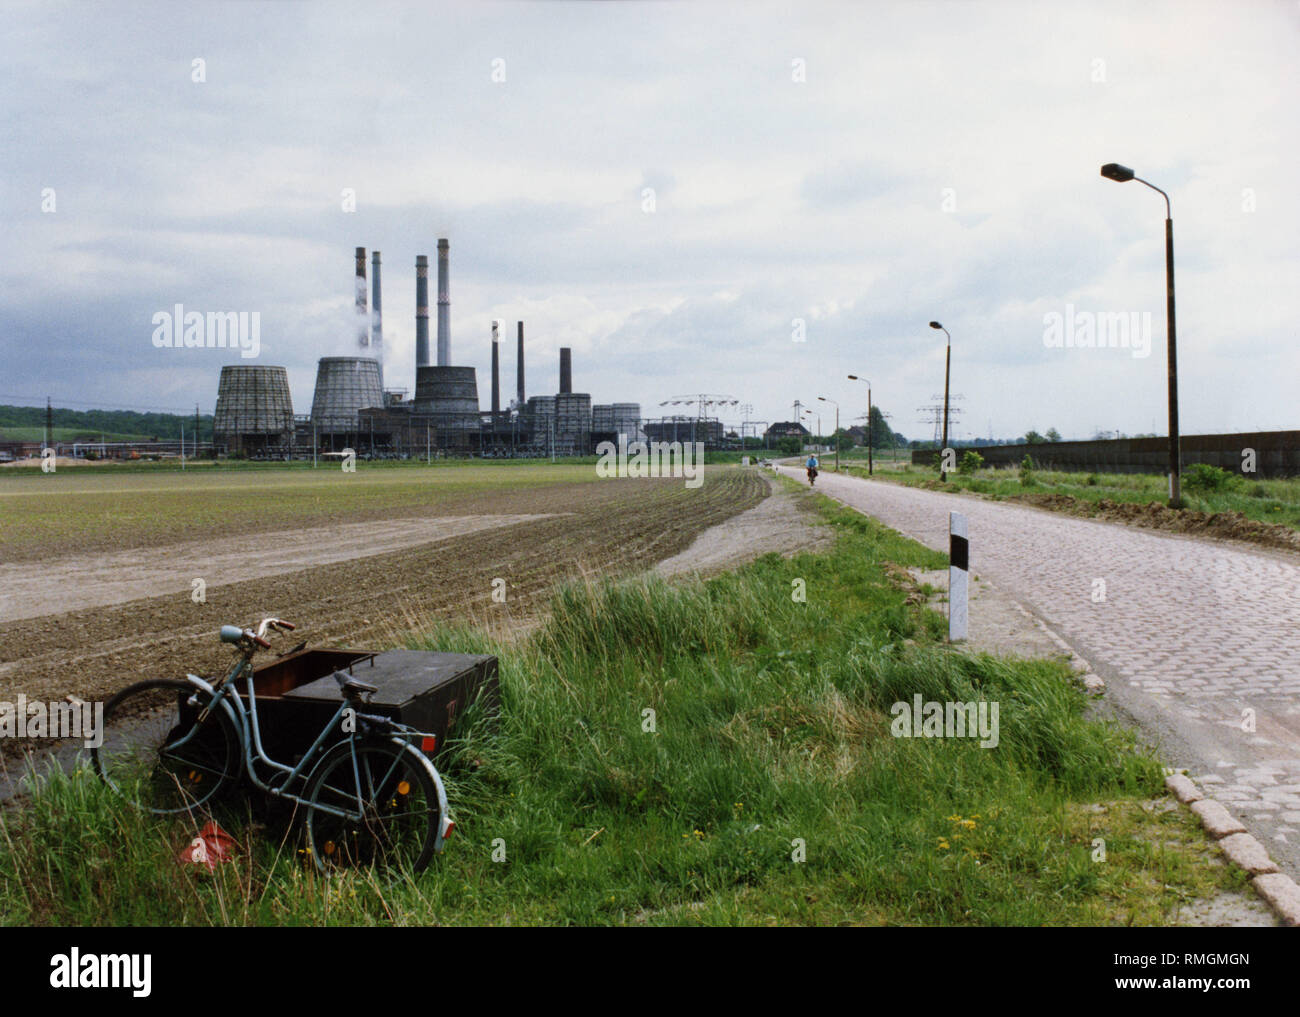 The brown coal power plant Harbke. It was closed on 27.12.1990. Stock Photo